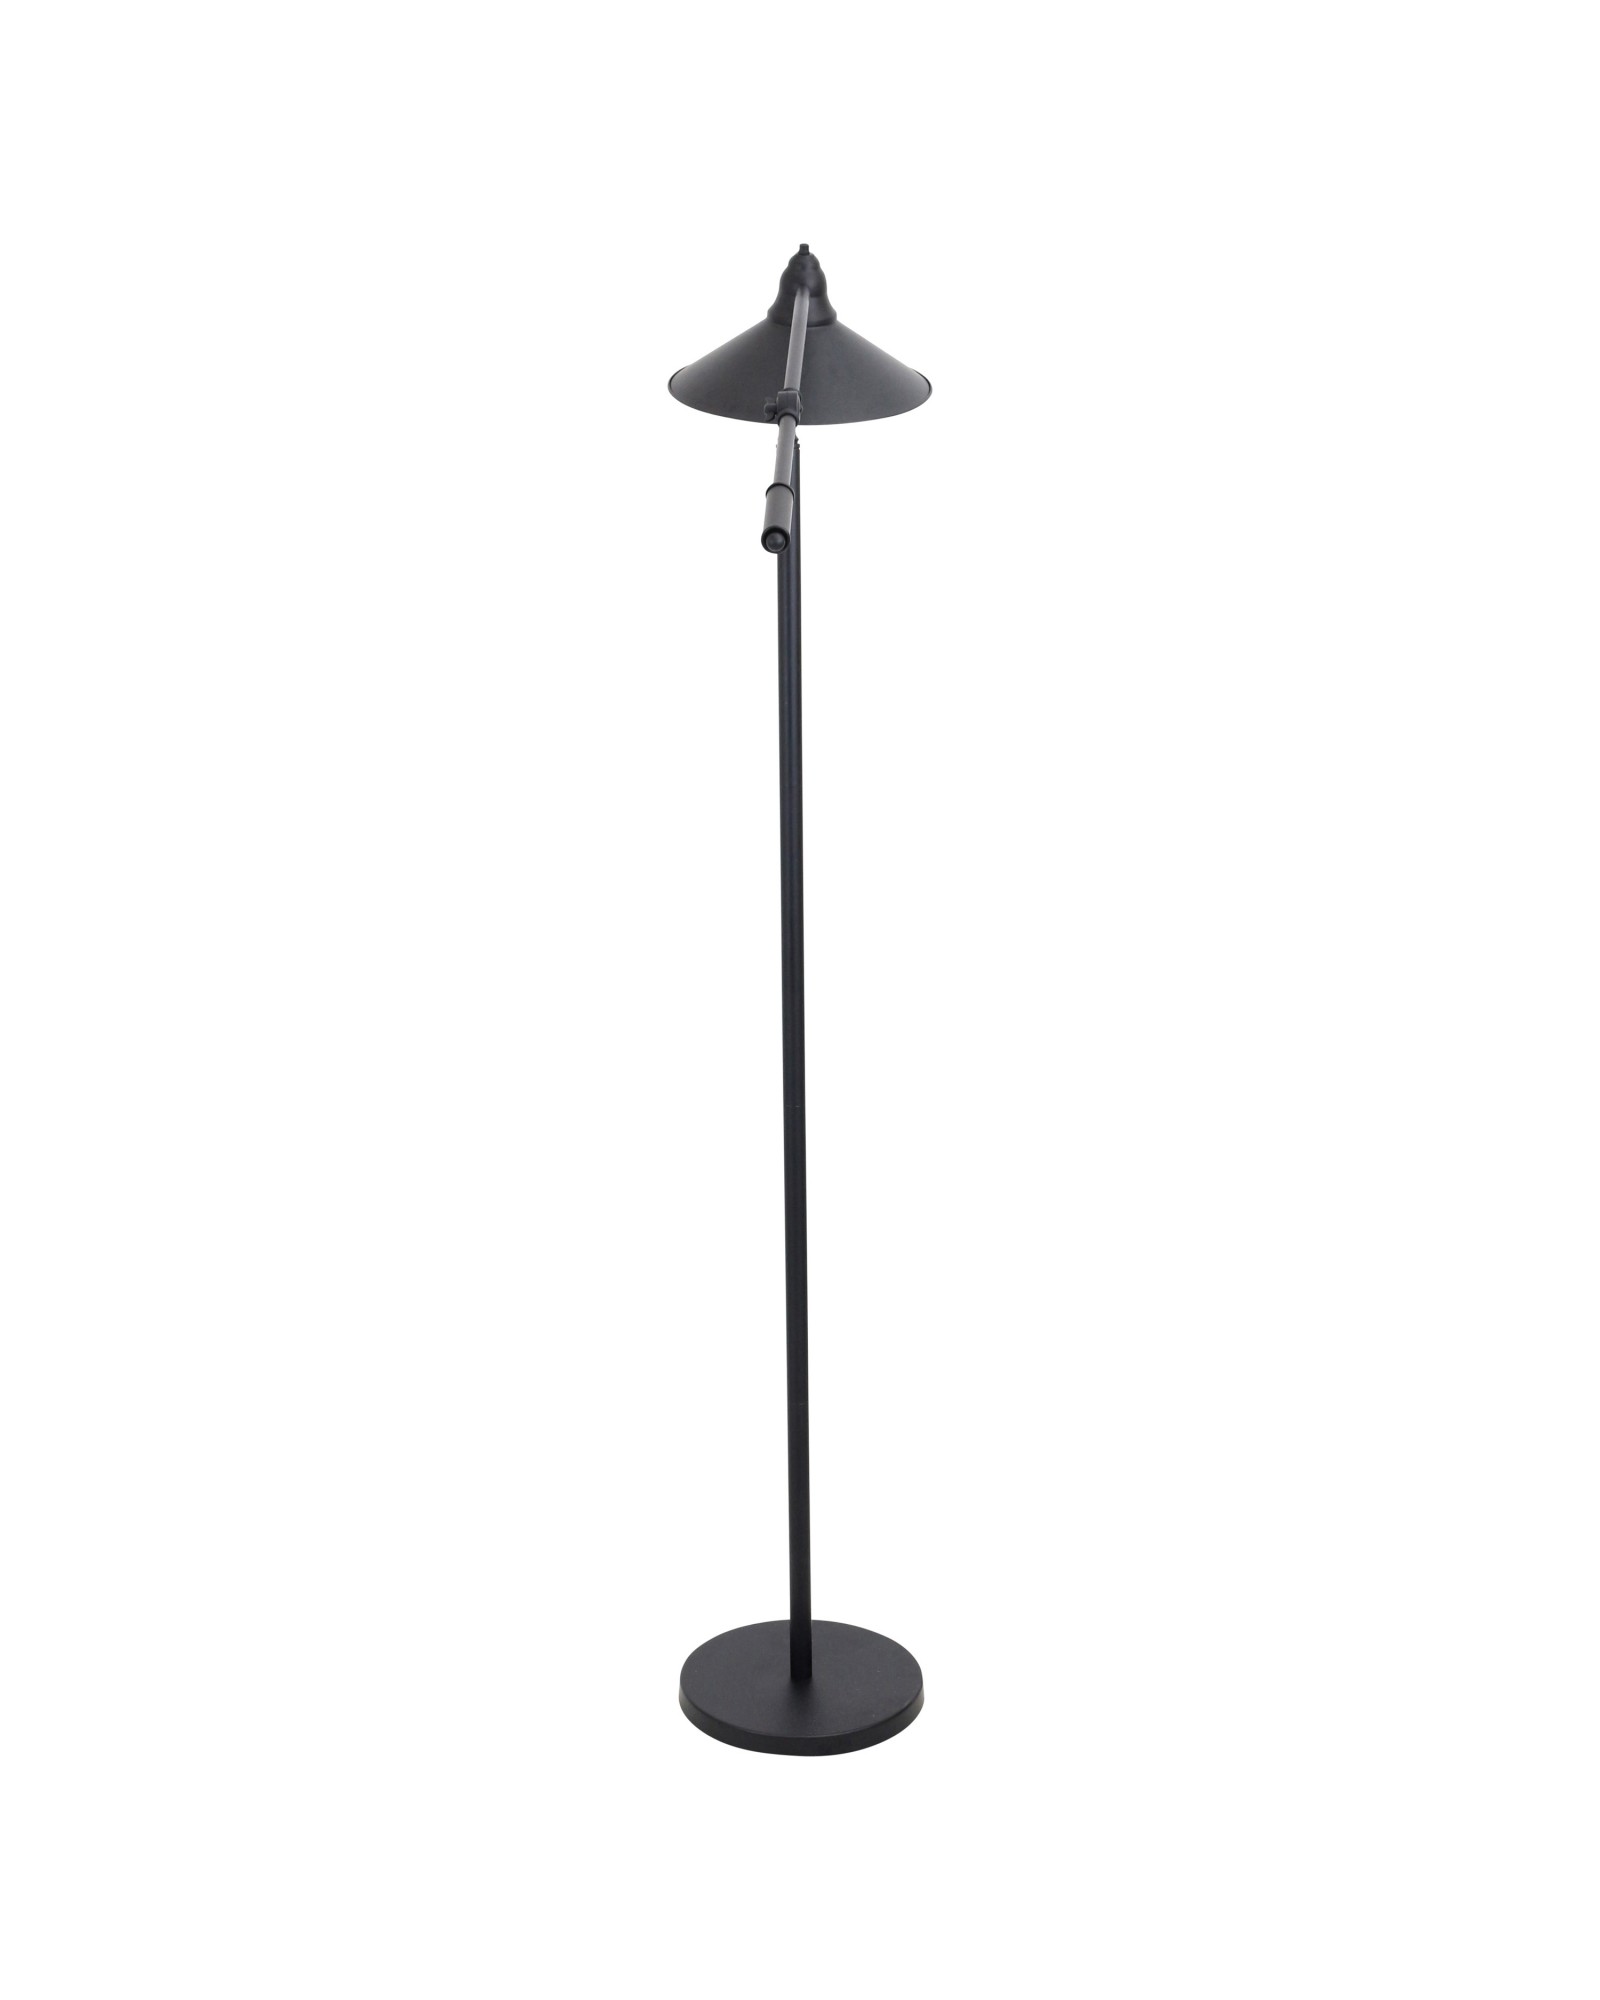 Paddy Industrial Floor Lamp in Black and Gold